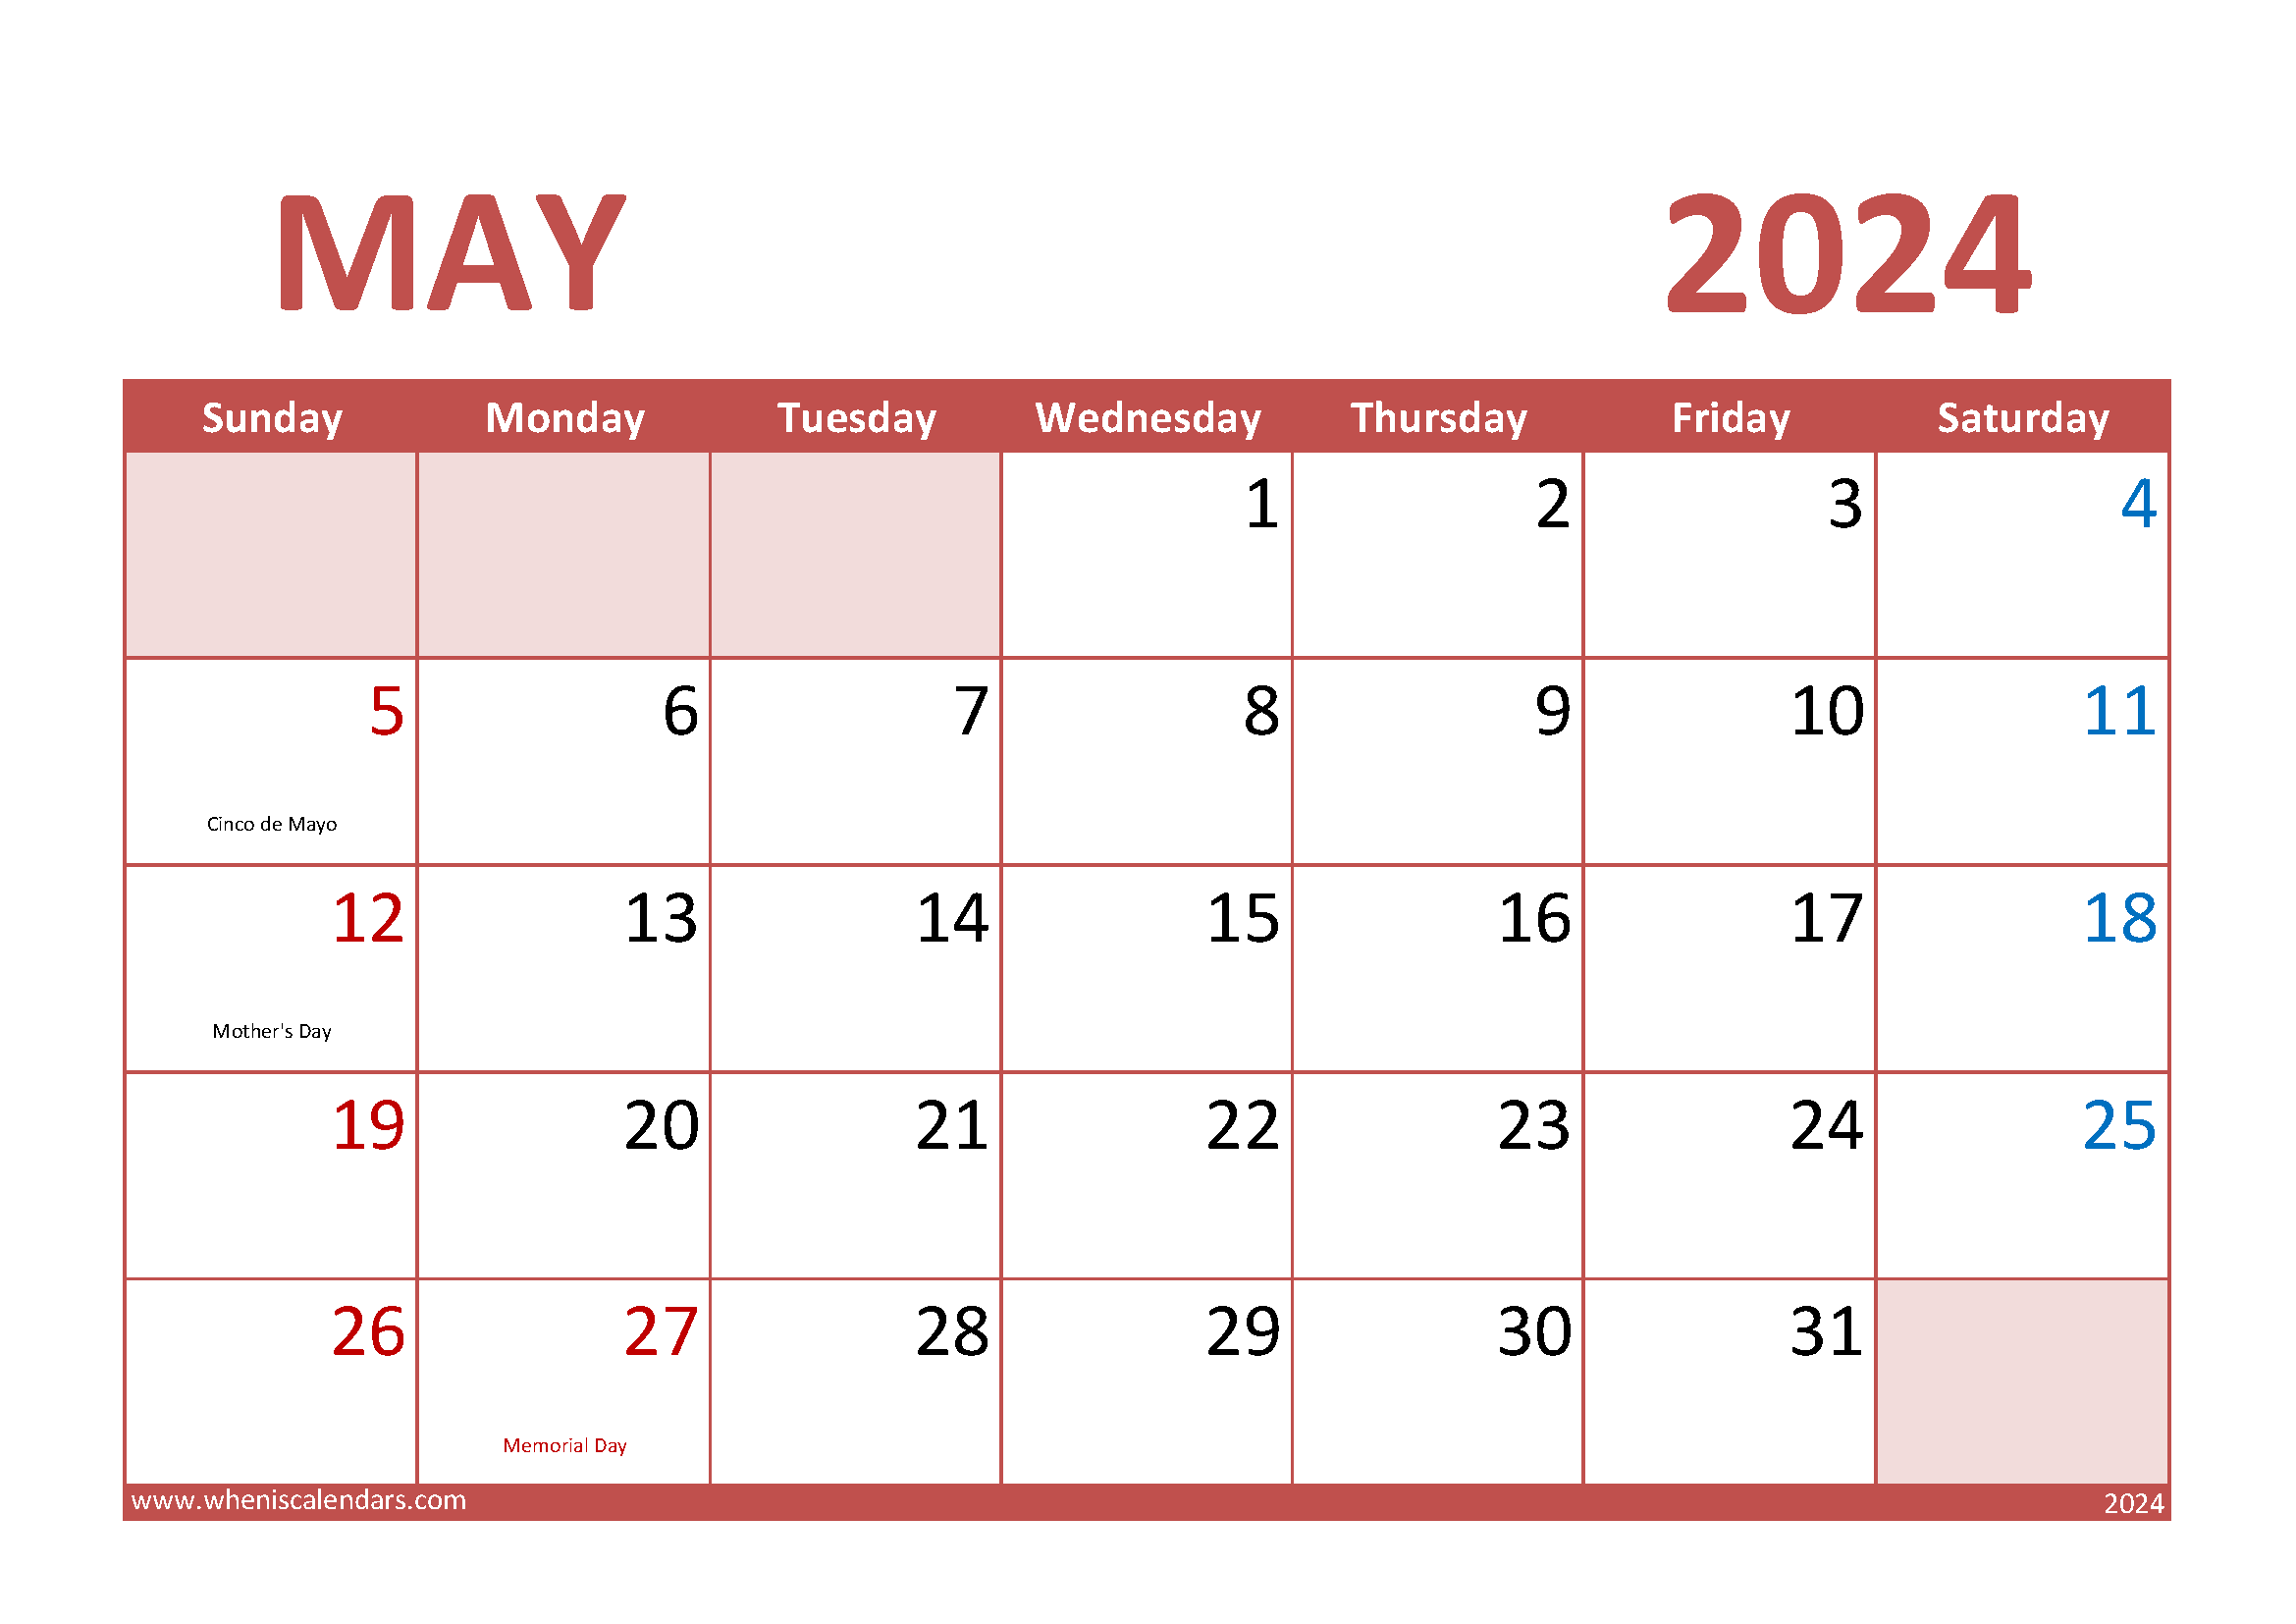 Special Days in May 2024